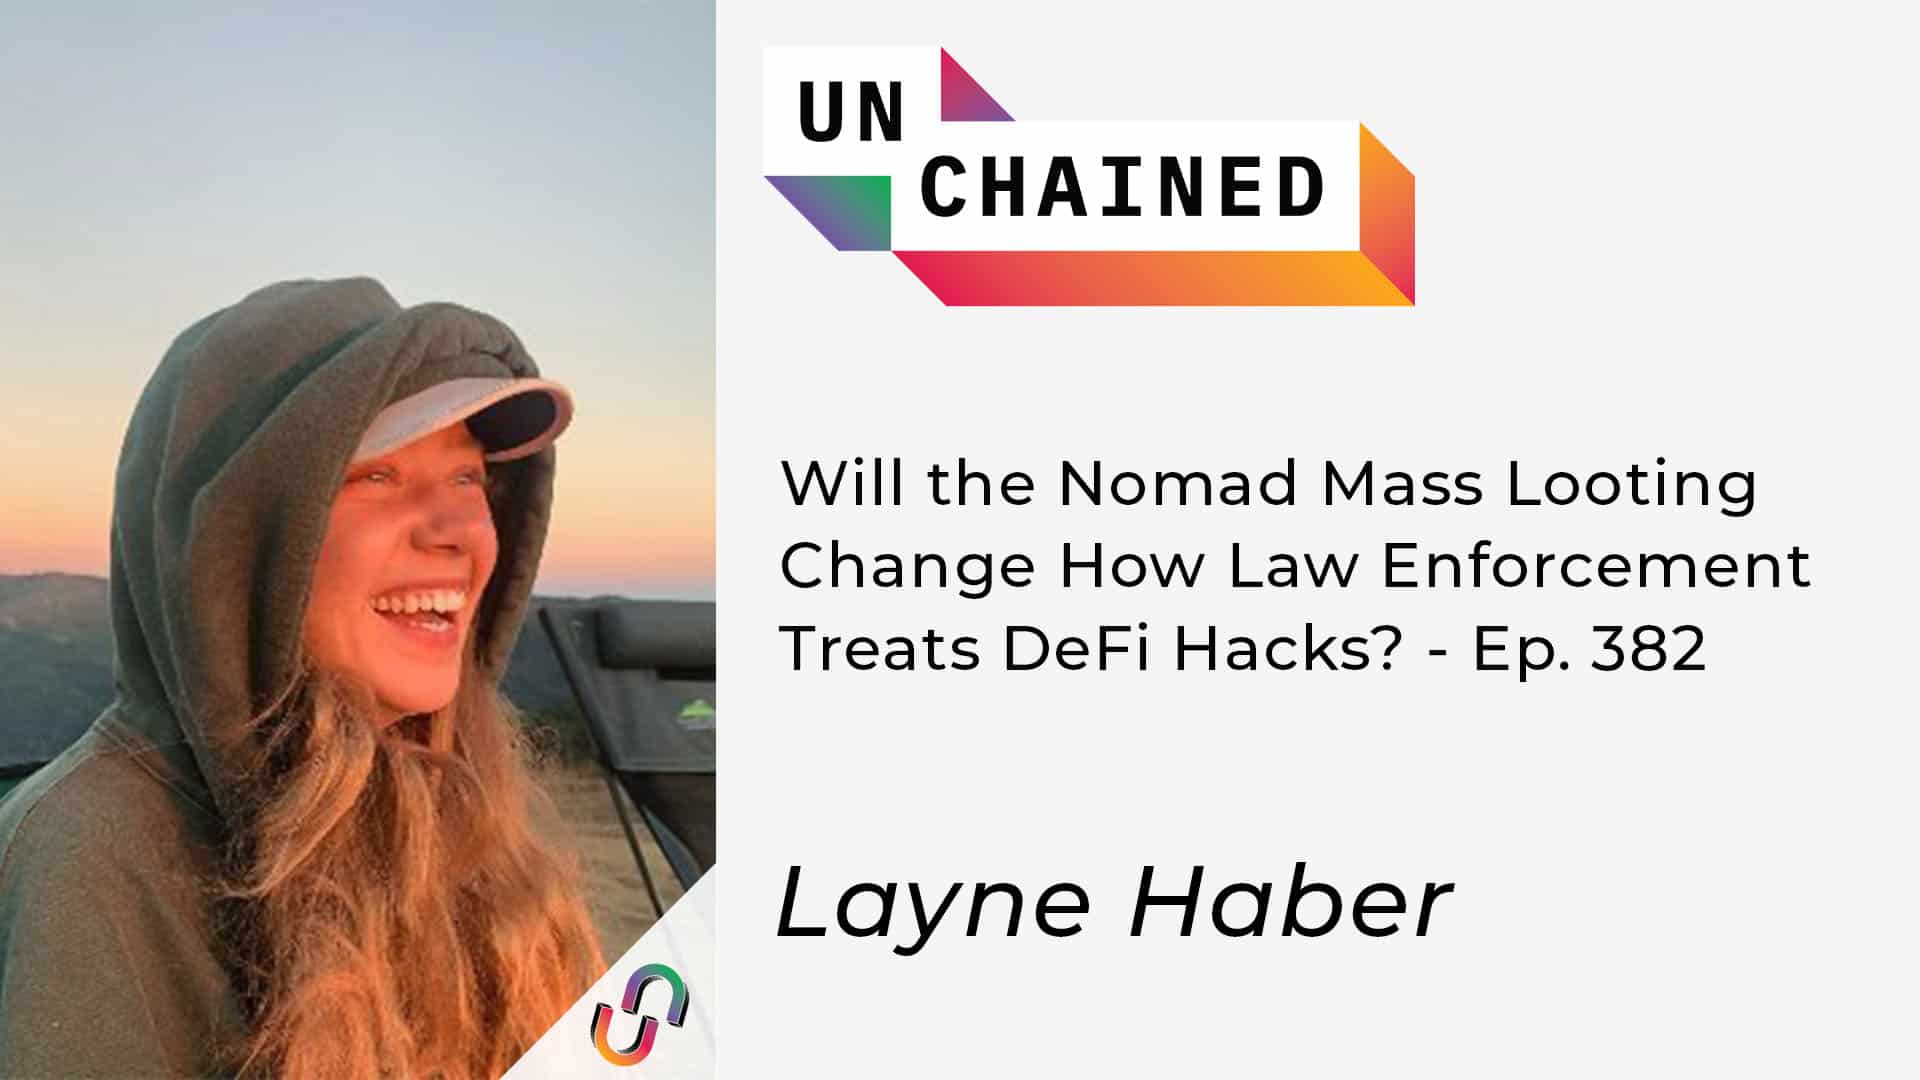 Will the Nomad Mass Looting Change How Law Enforcement Treats DeFi Hacks? - Ep. 382